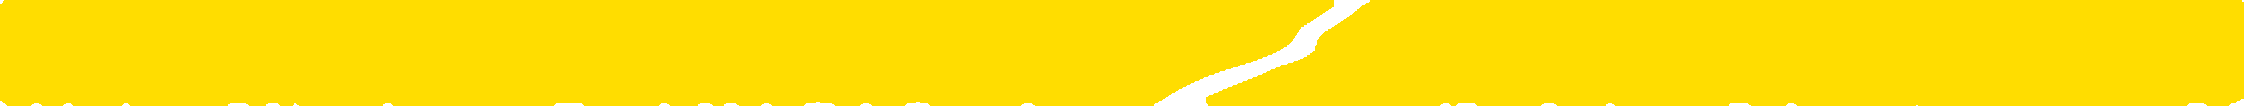 A rugged yellow bar with a slice taken out of it.